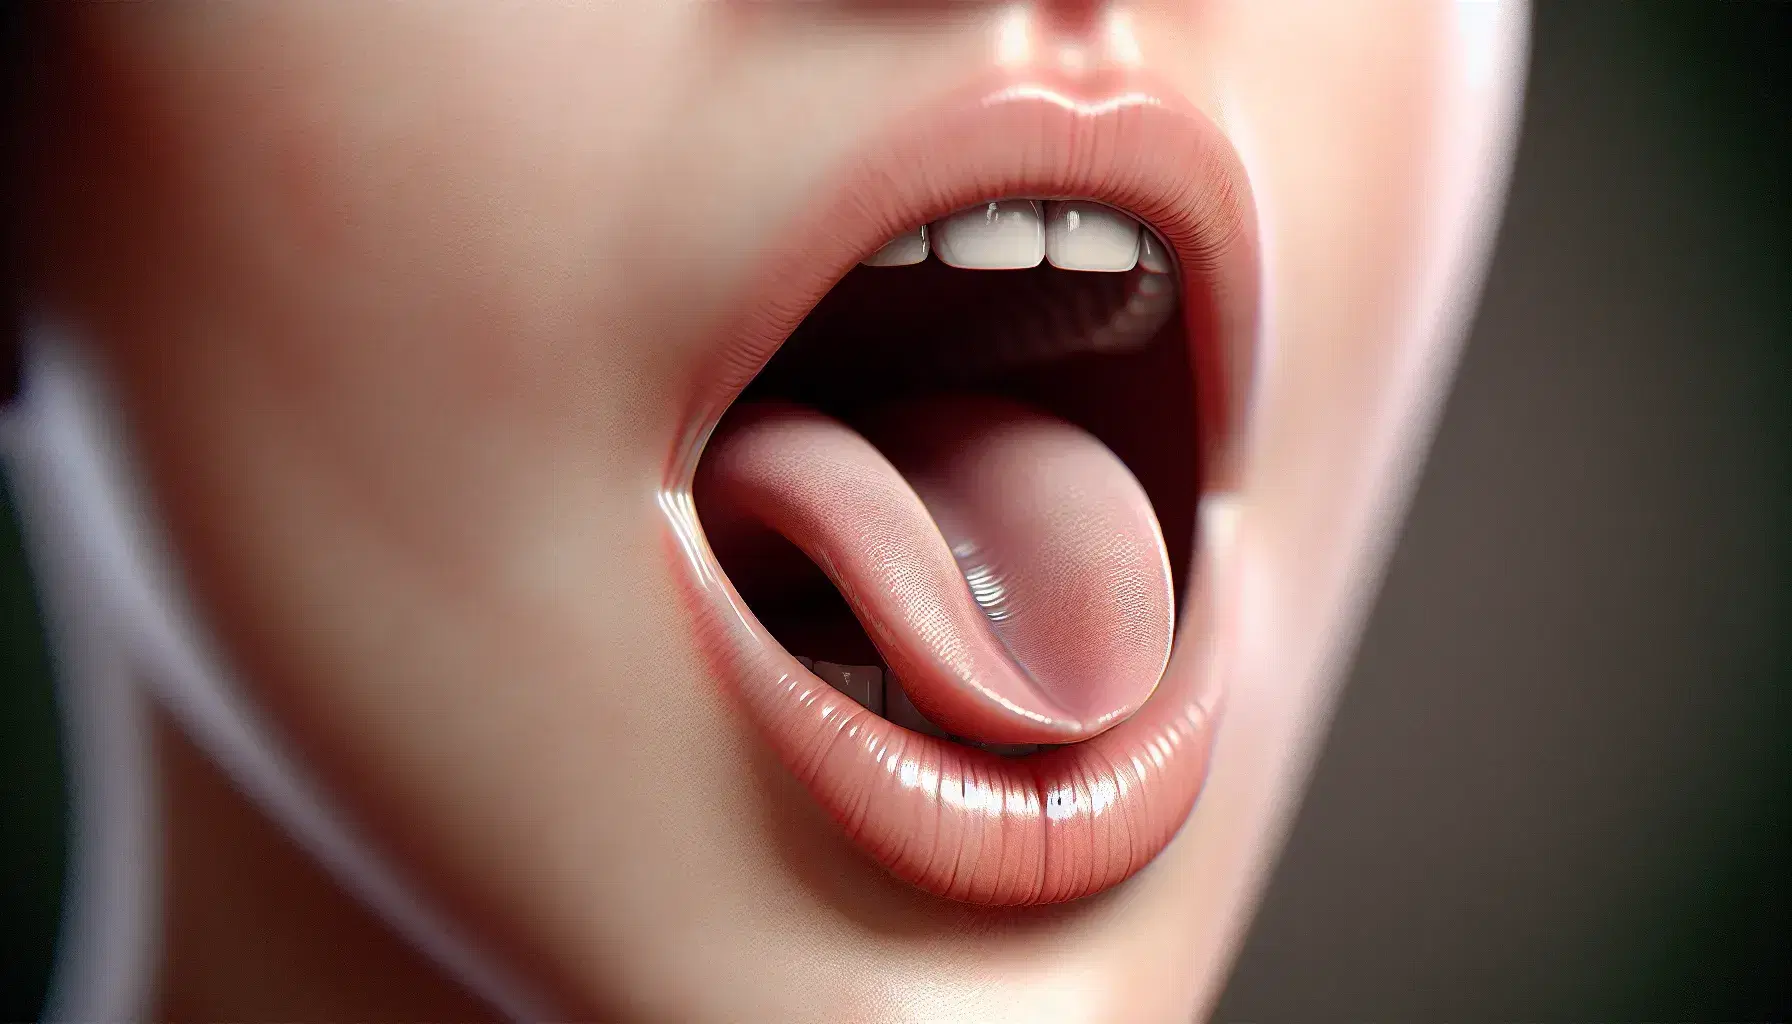 Close-up view of a person's mouth with lips slightly parted and tongue curled upwards, indicating the action of a trilled R sound.